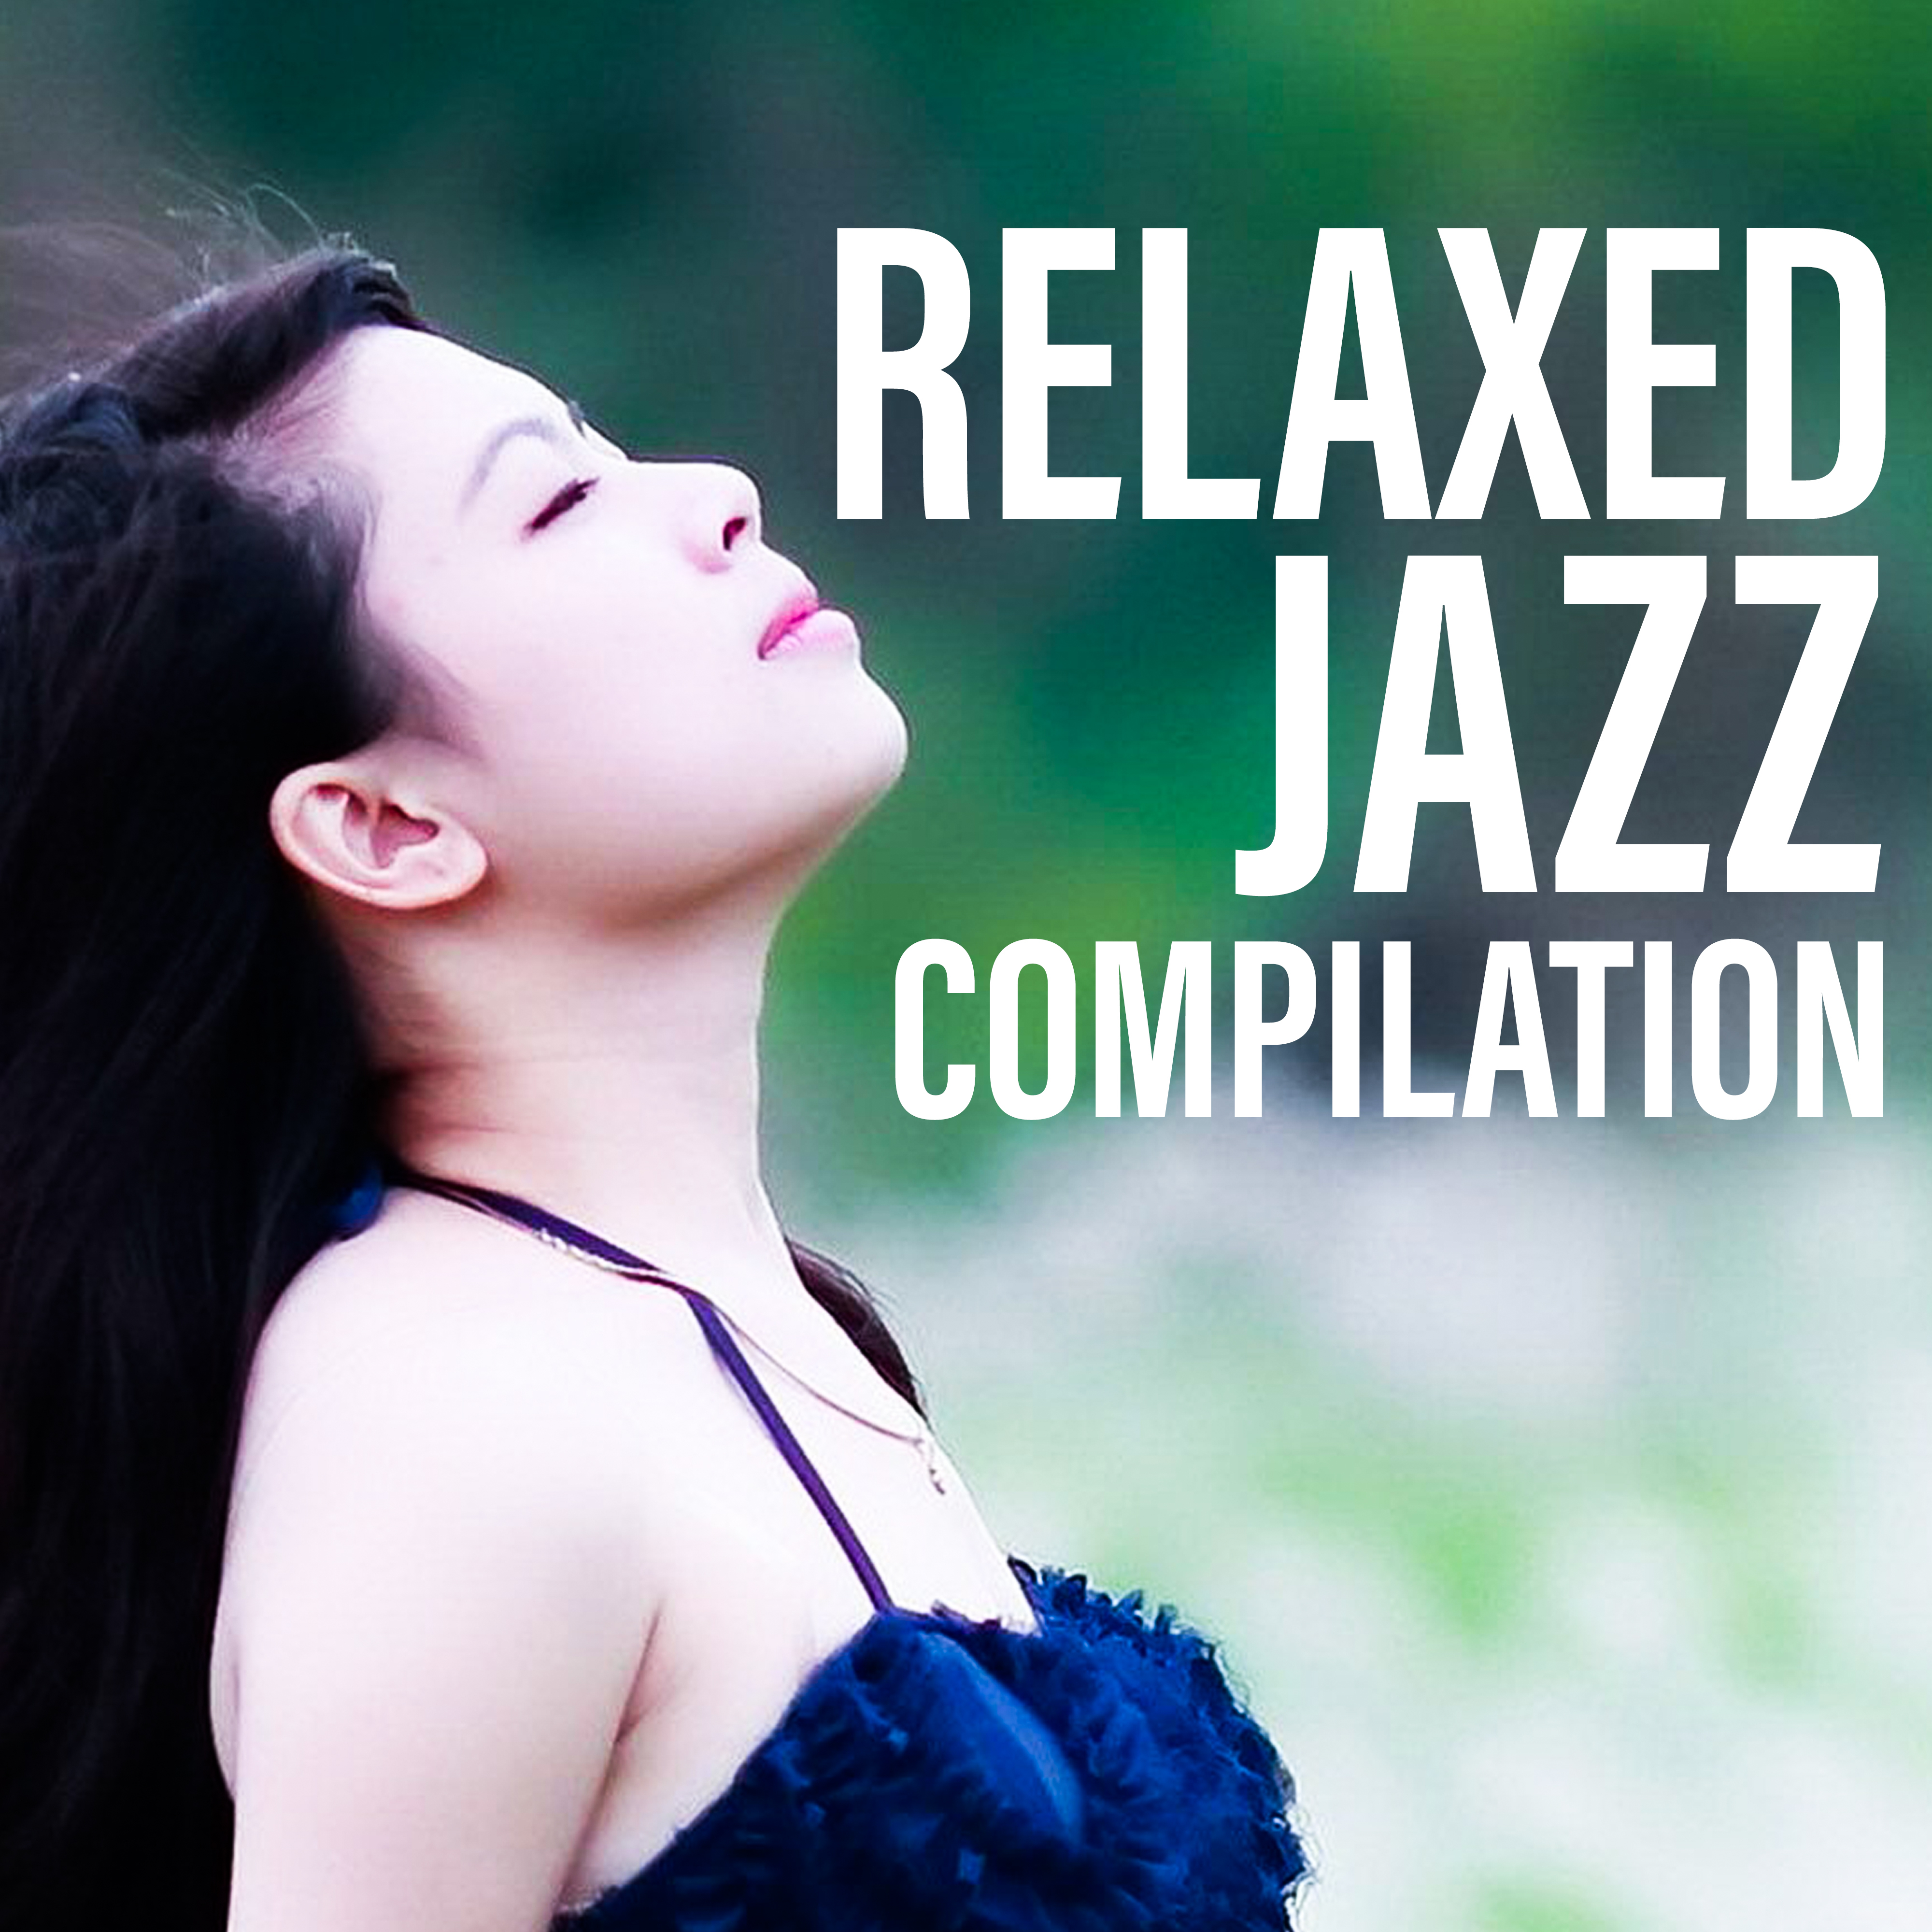 Relaxed Jazz Compilation